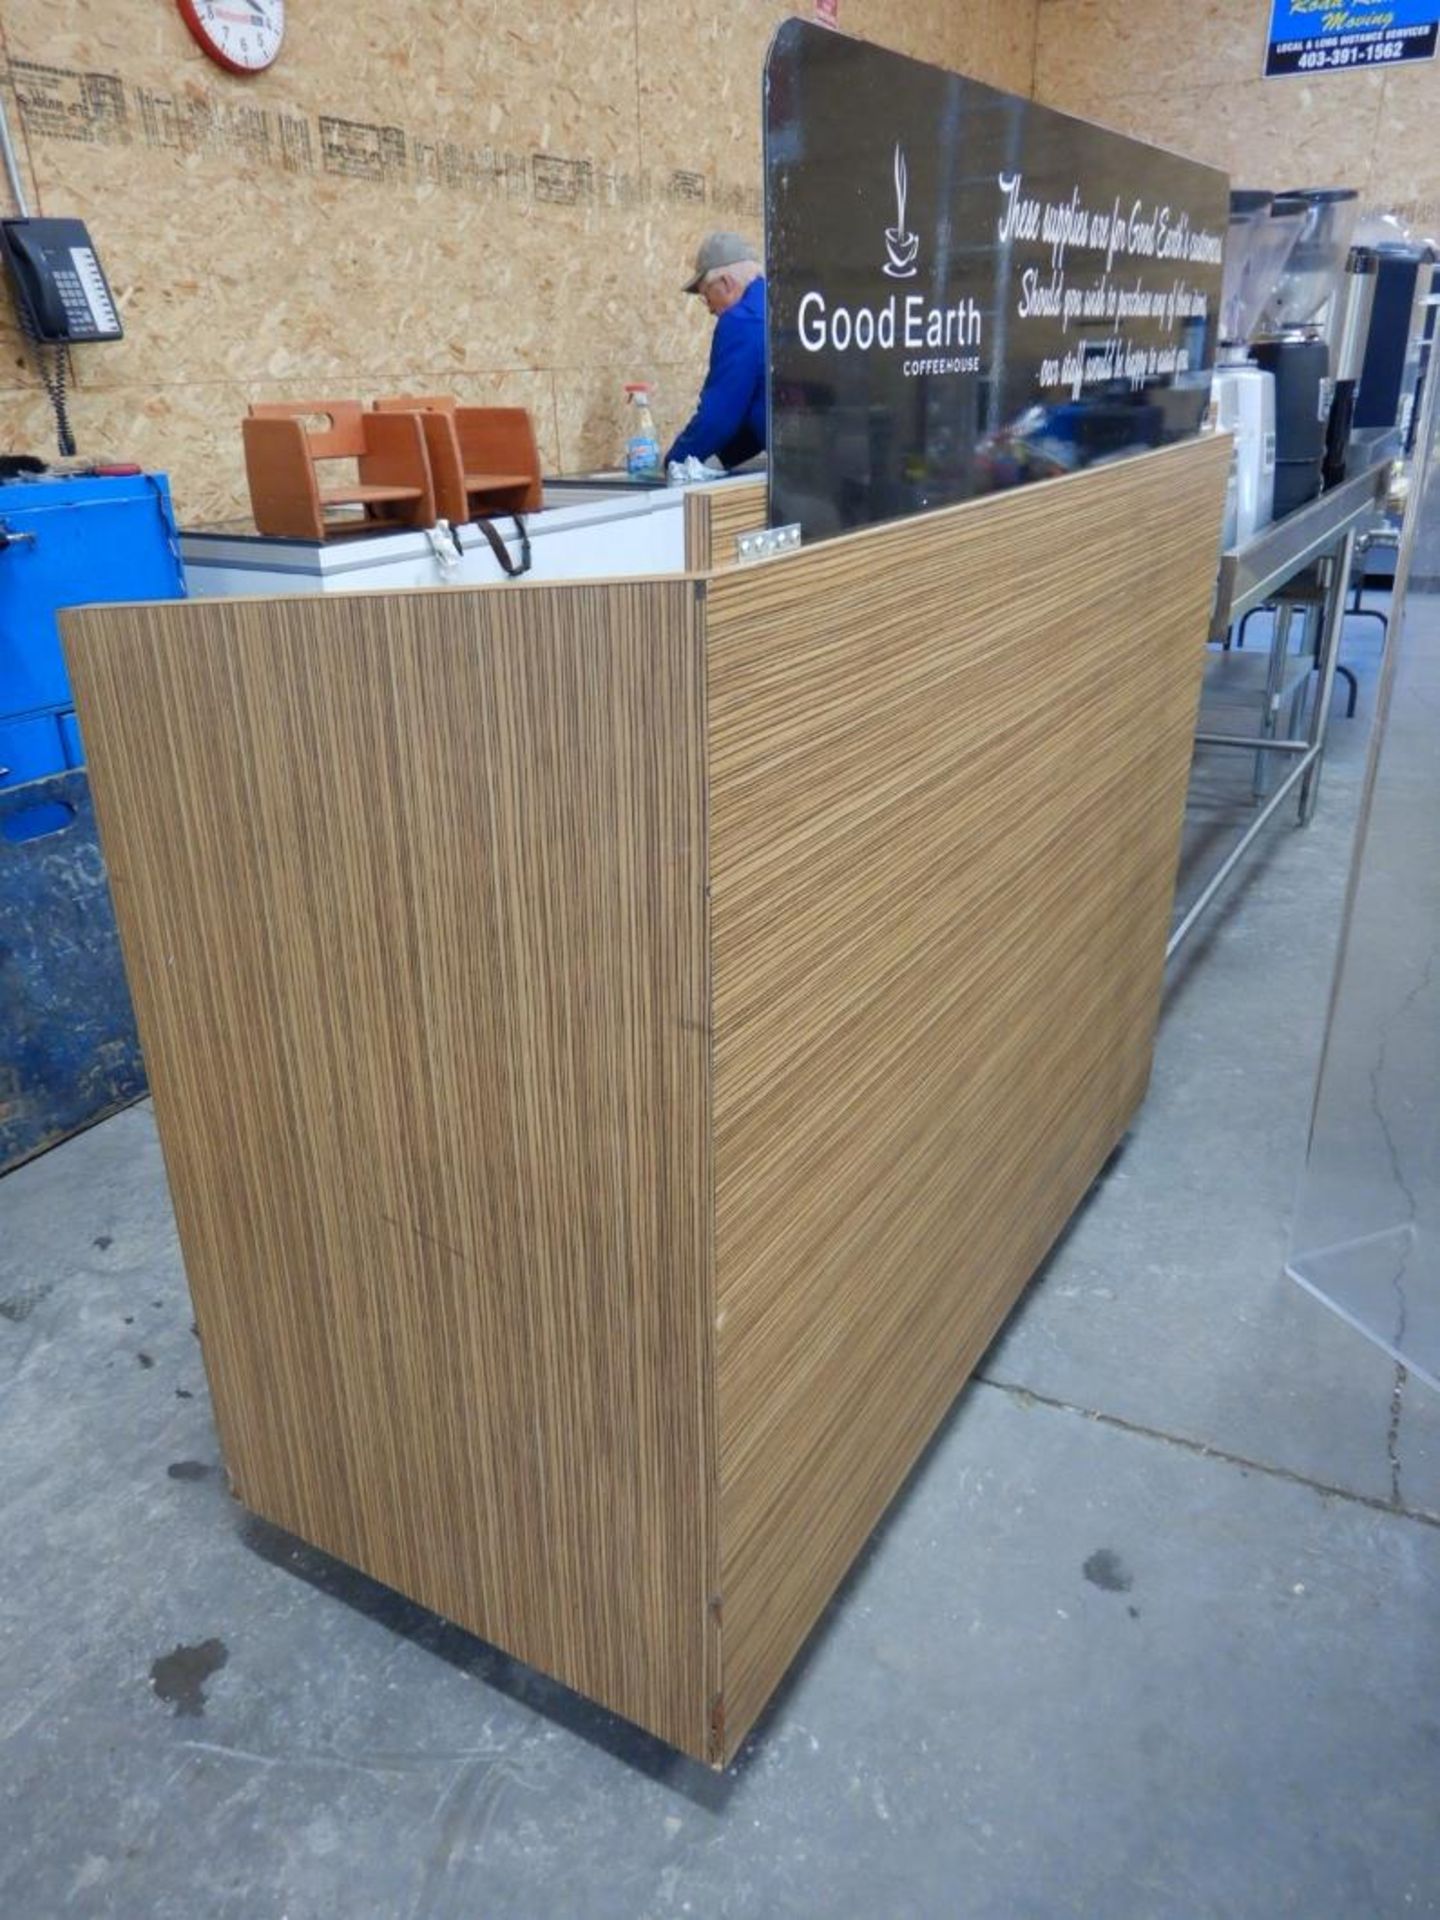 MILLWORK COFFEE SERVICE COUNTER W/CASTERS – 56” - Image 2 of 2